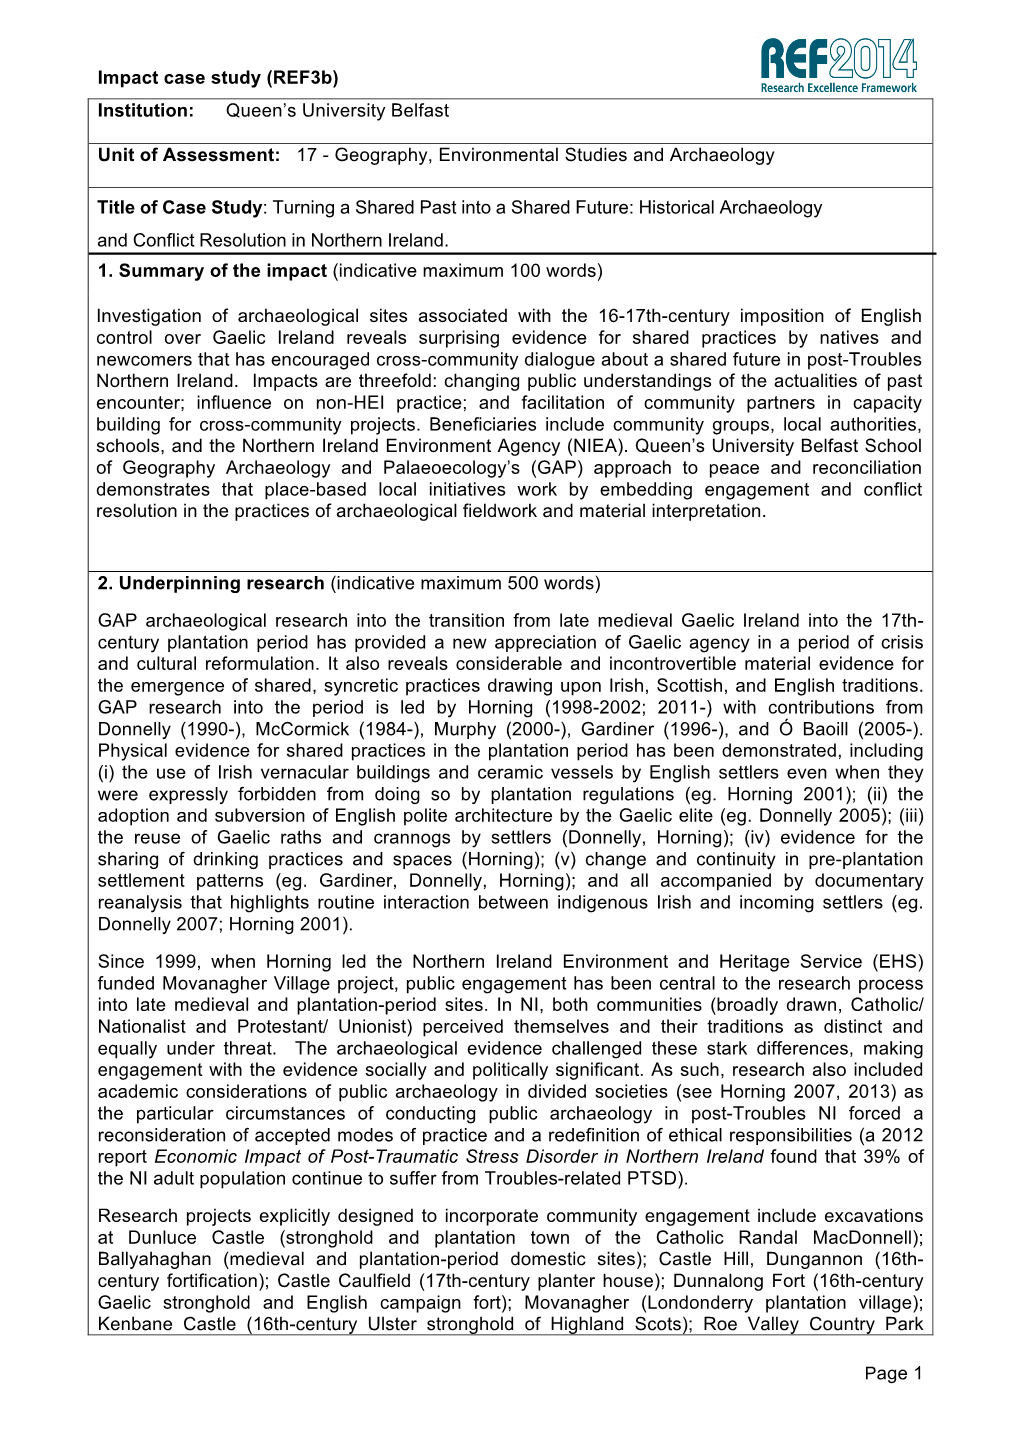 Impact Case Study (Ref3b) Page 1 Institution: Queen's University